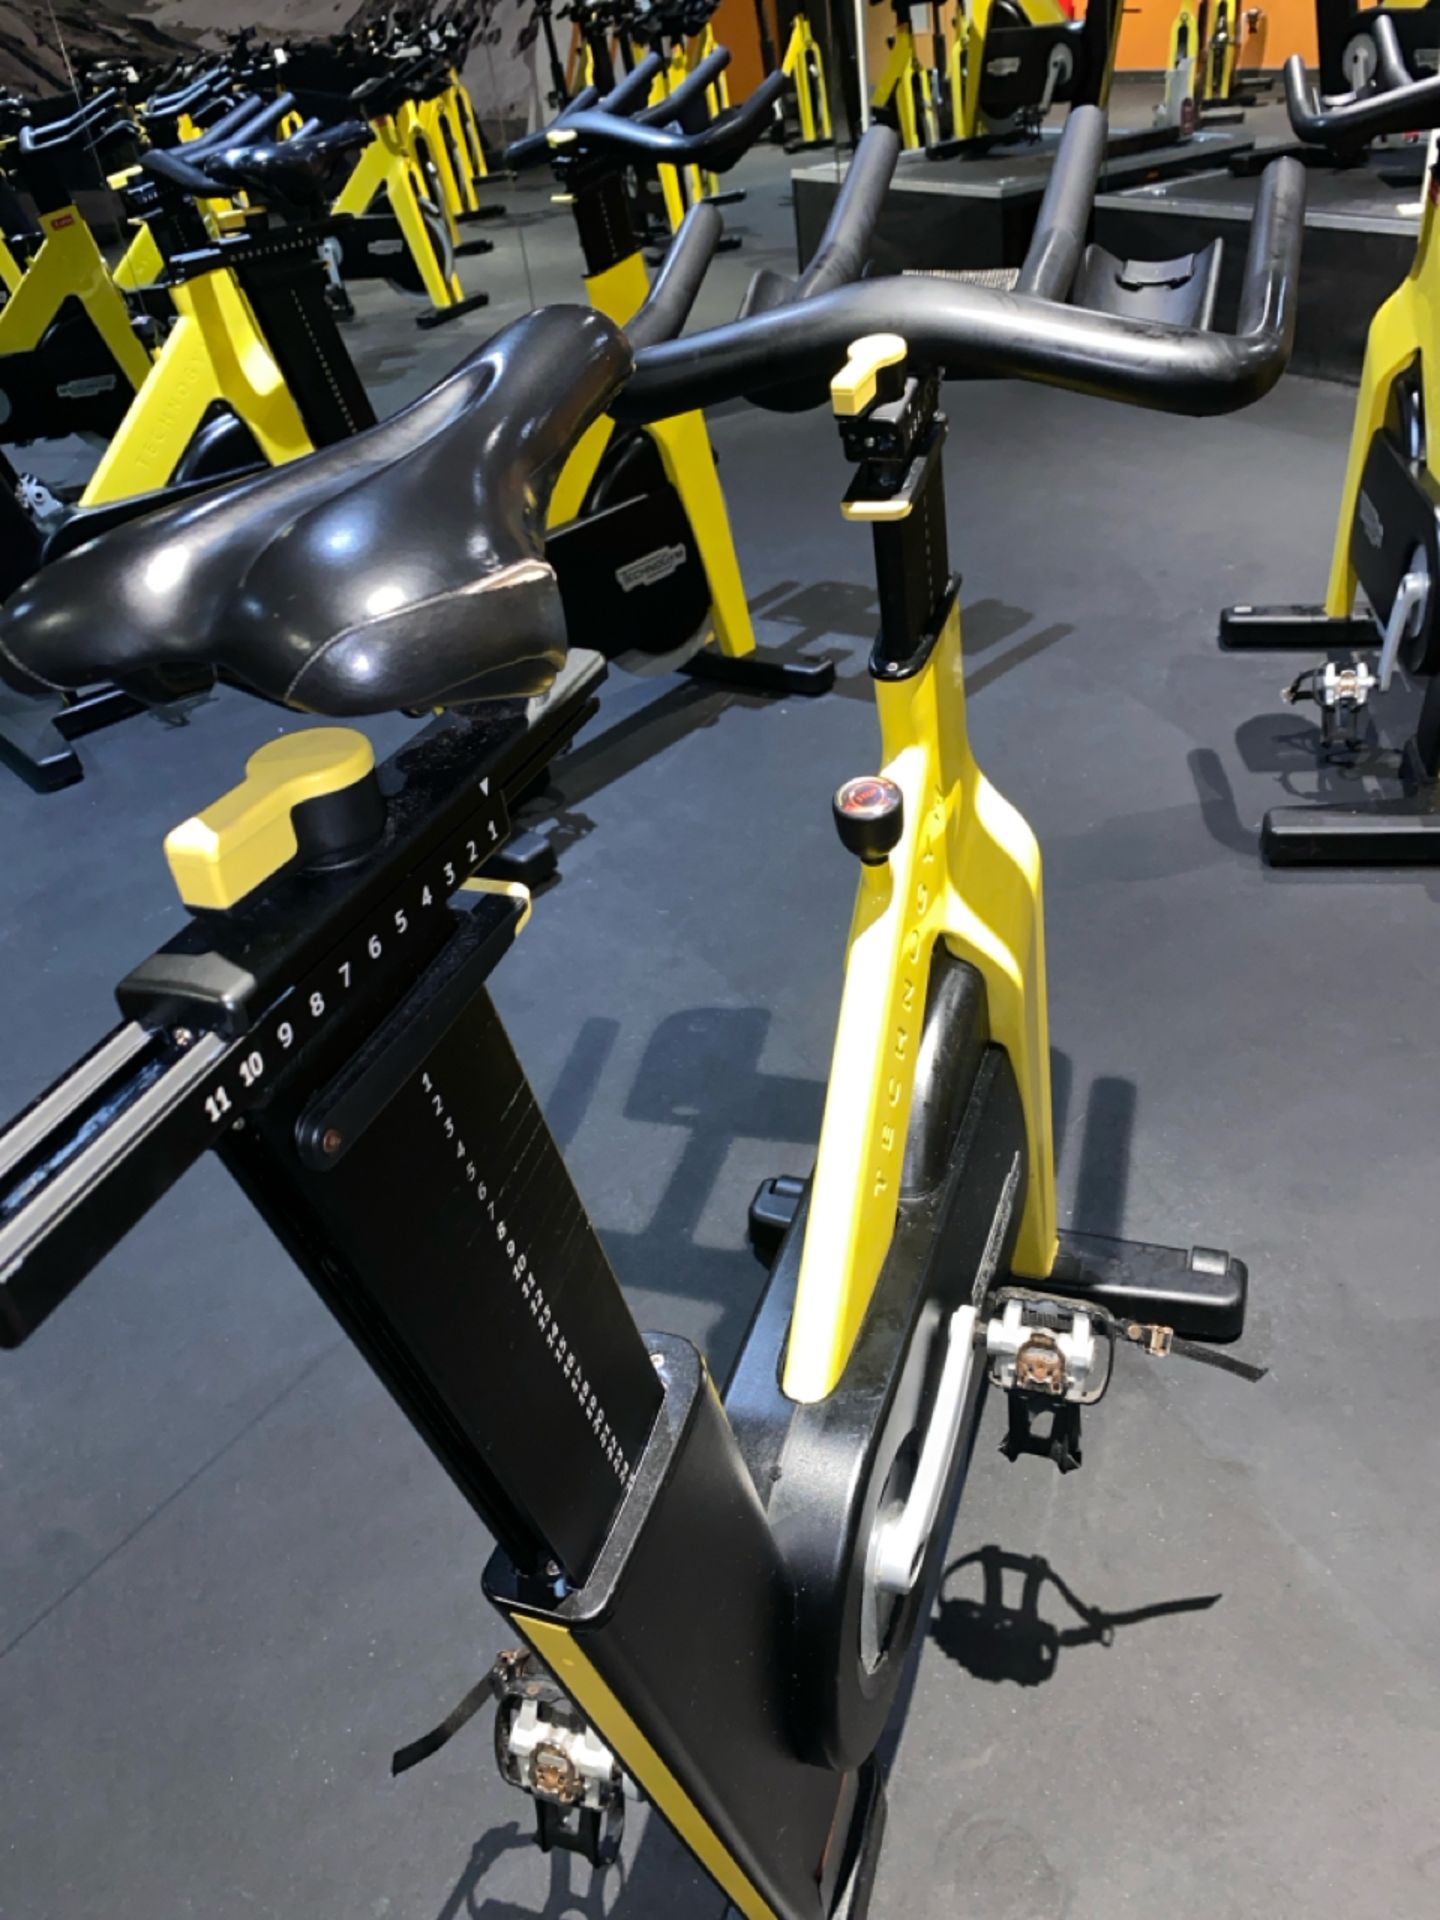 Technogym Group Cycle Ride Spin Bike - Image 4 of 10